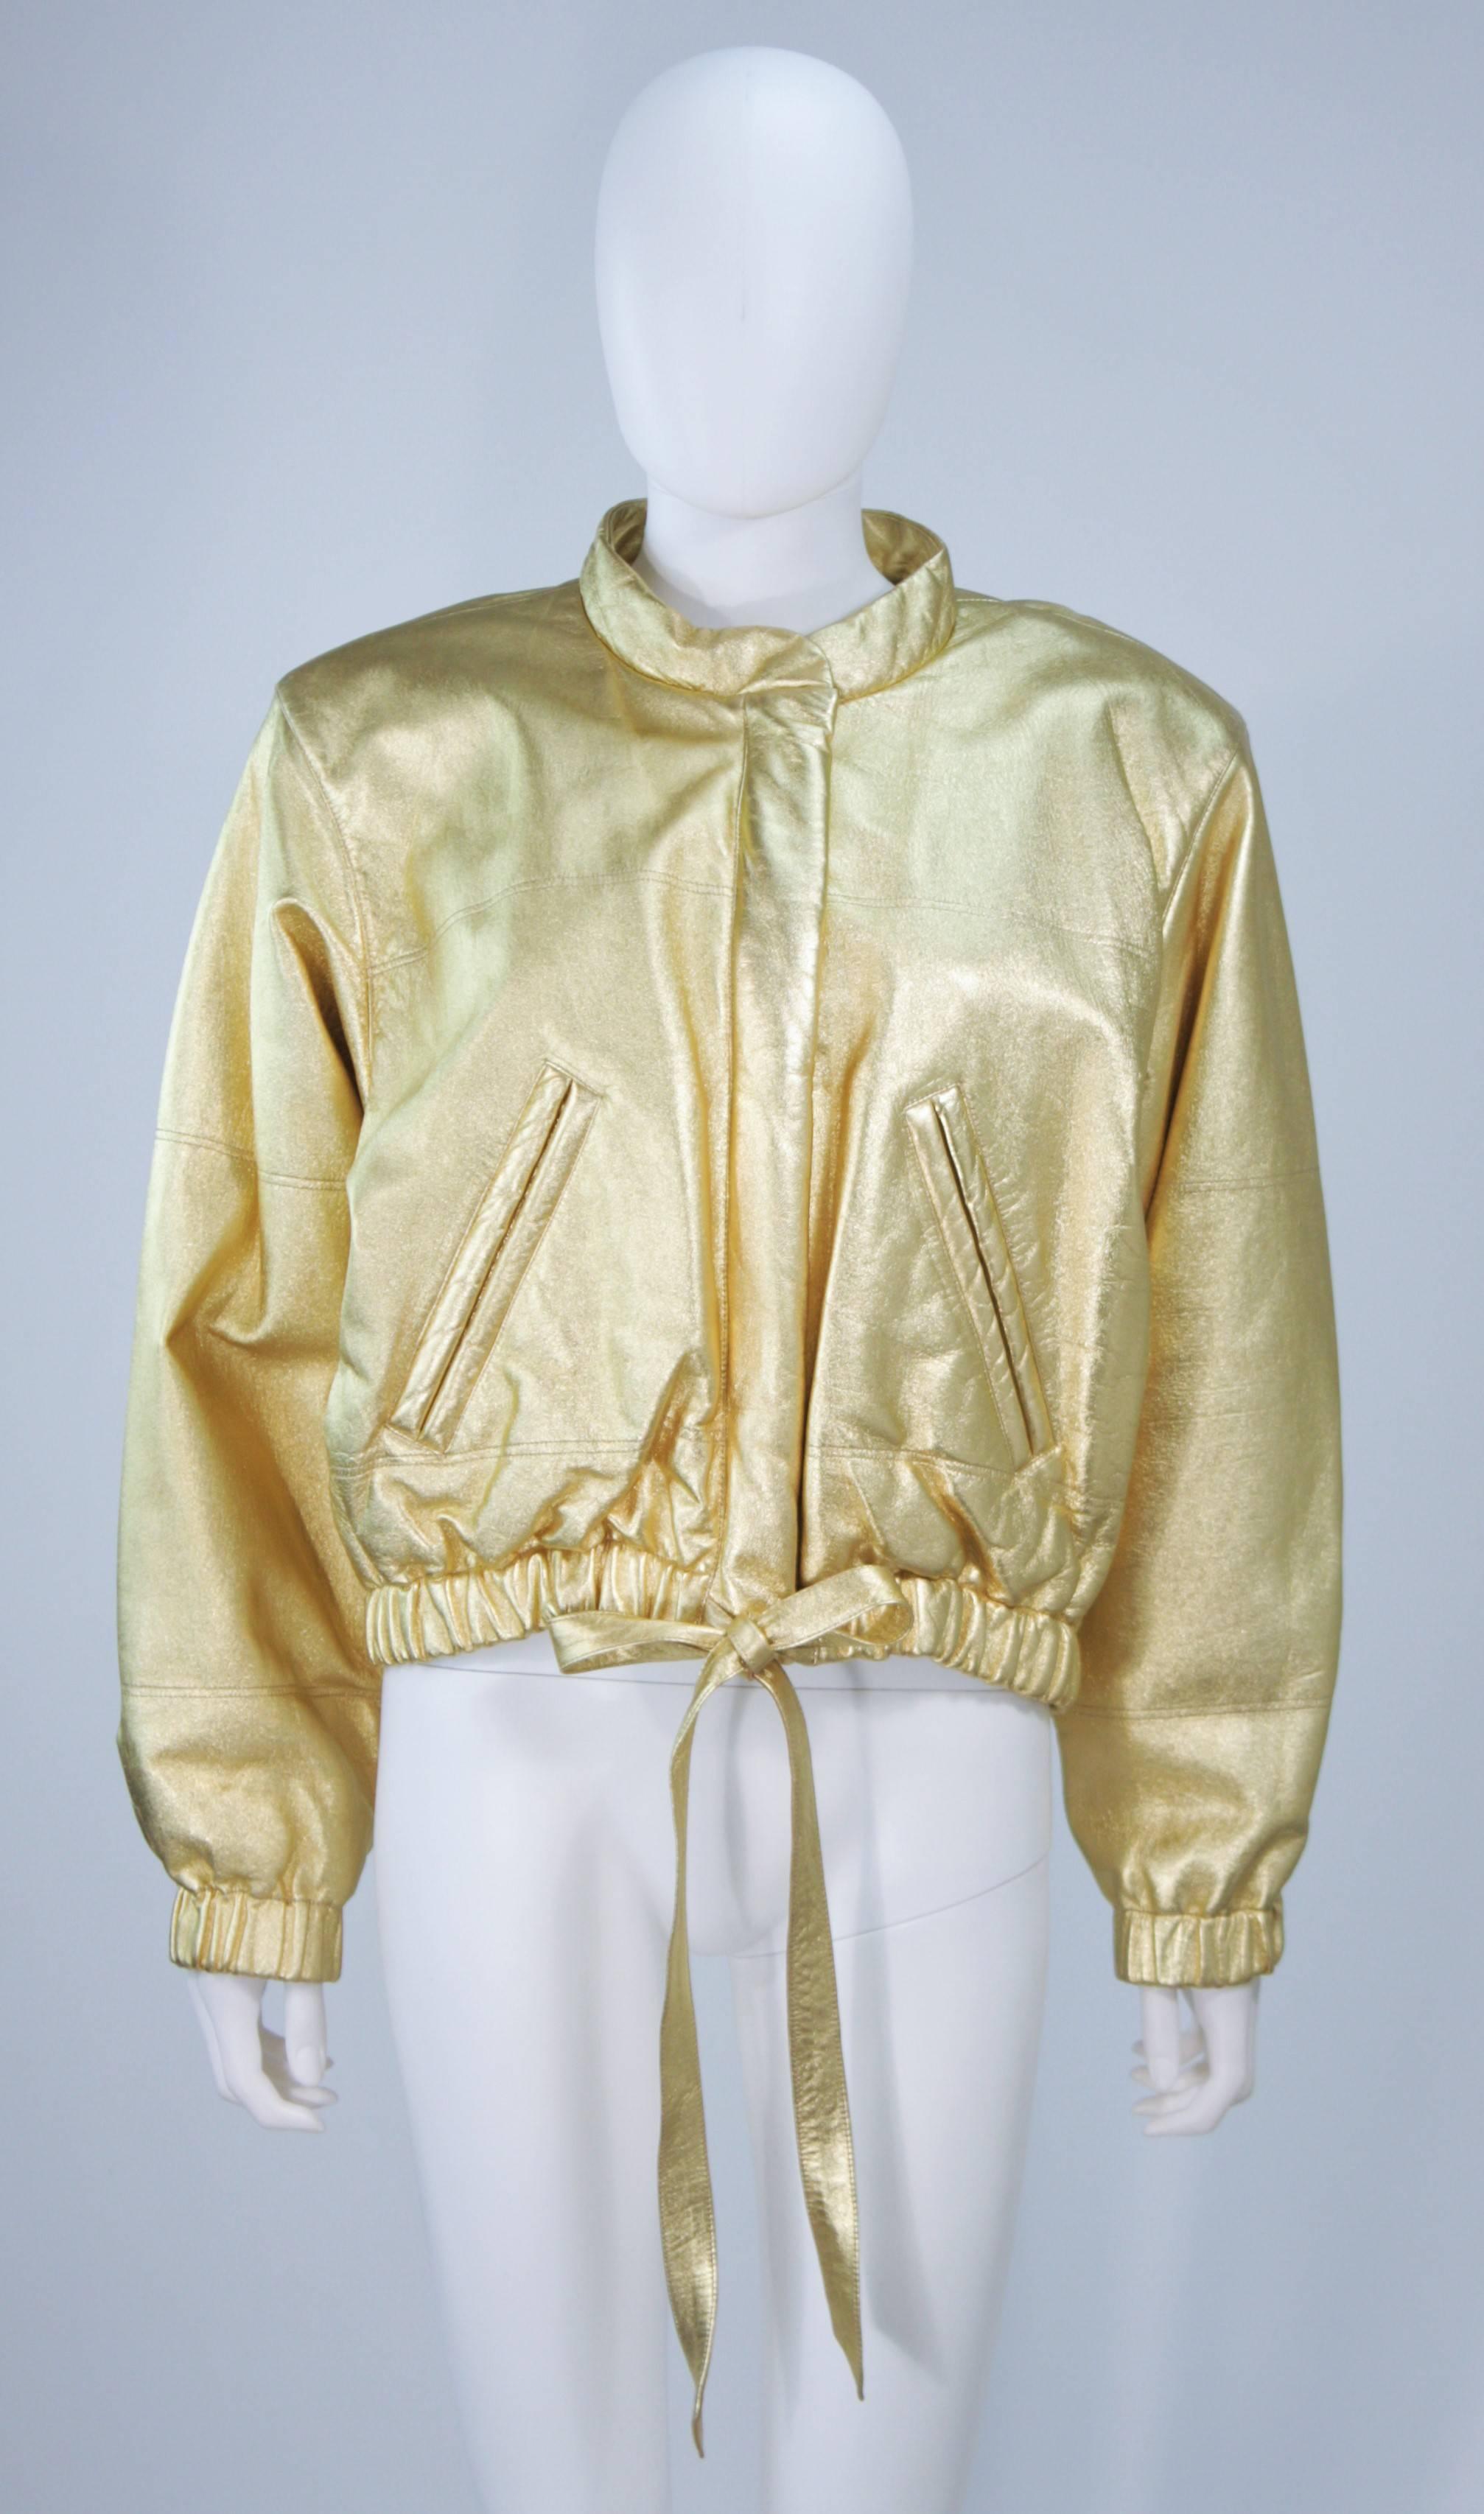  This Yves Saint Laurent jacket is composed of a gold metallic leather. Features a center front zipper, side pocket, and elastic at the waist/cuffs. In excellent vintage condition.

**Please cross-reference measurements for personal accuracy. Size